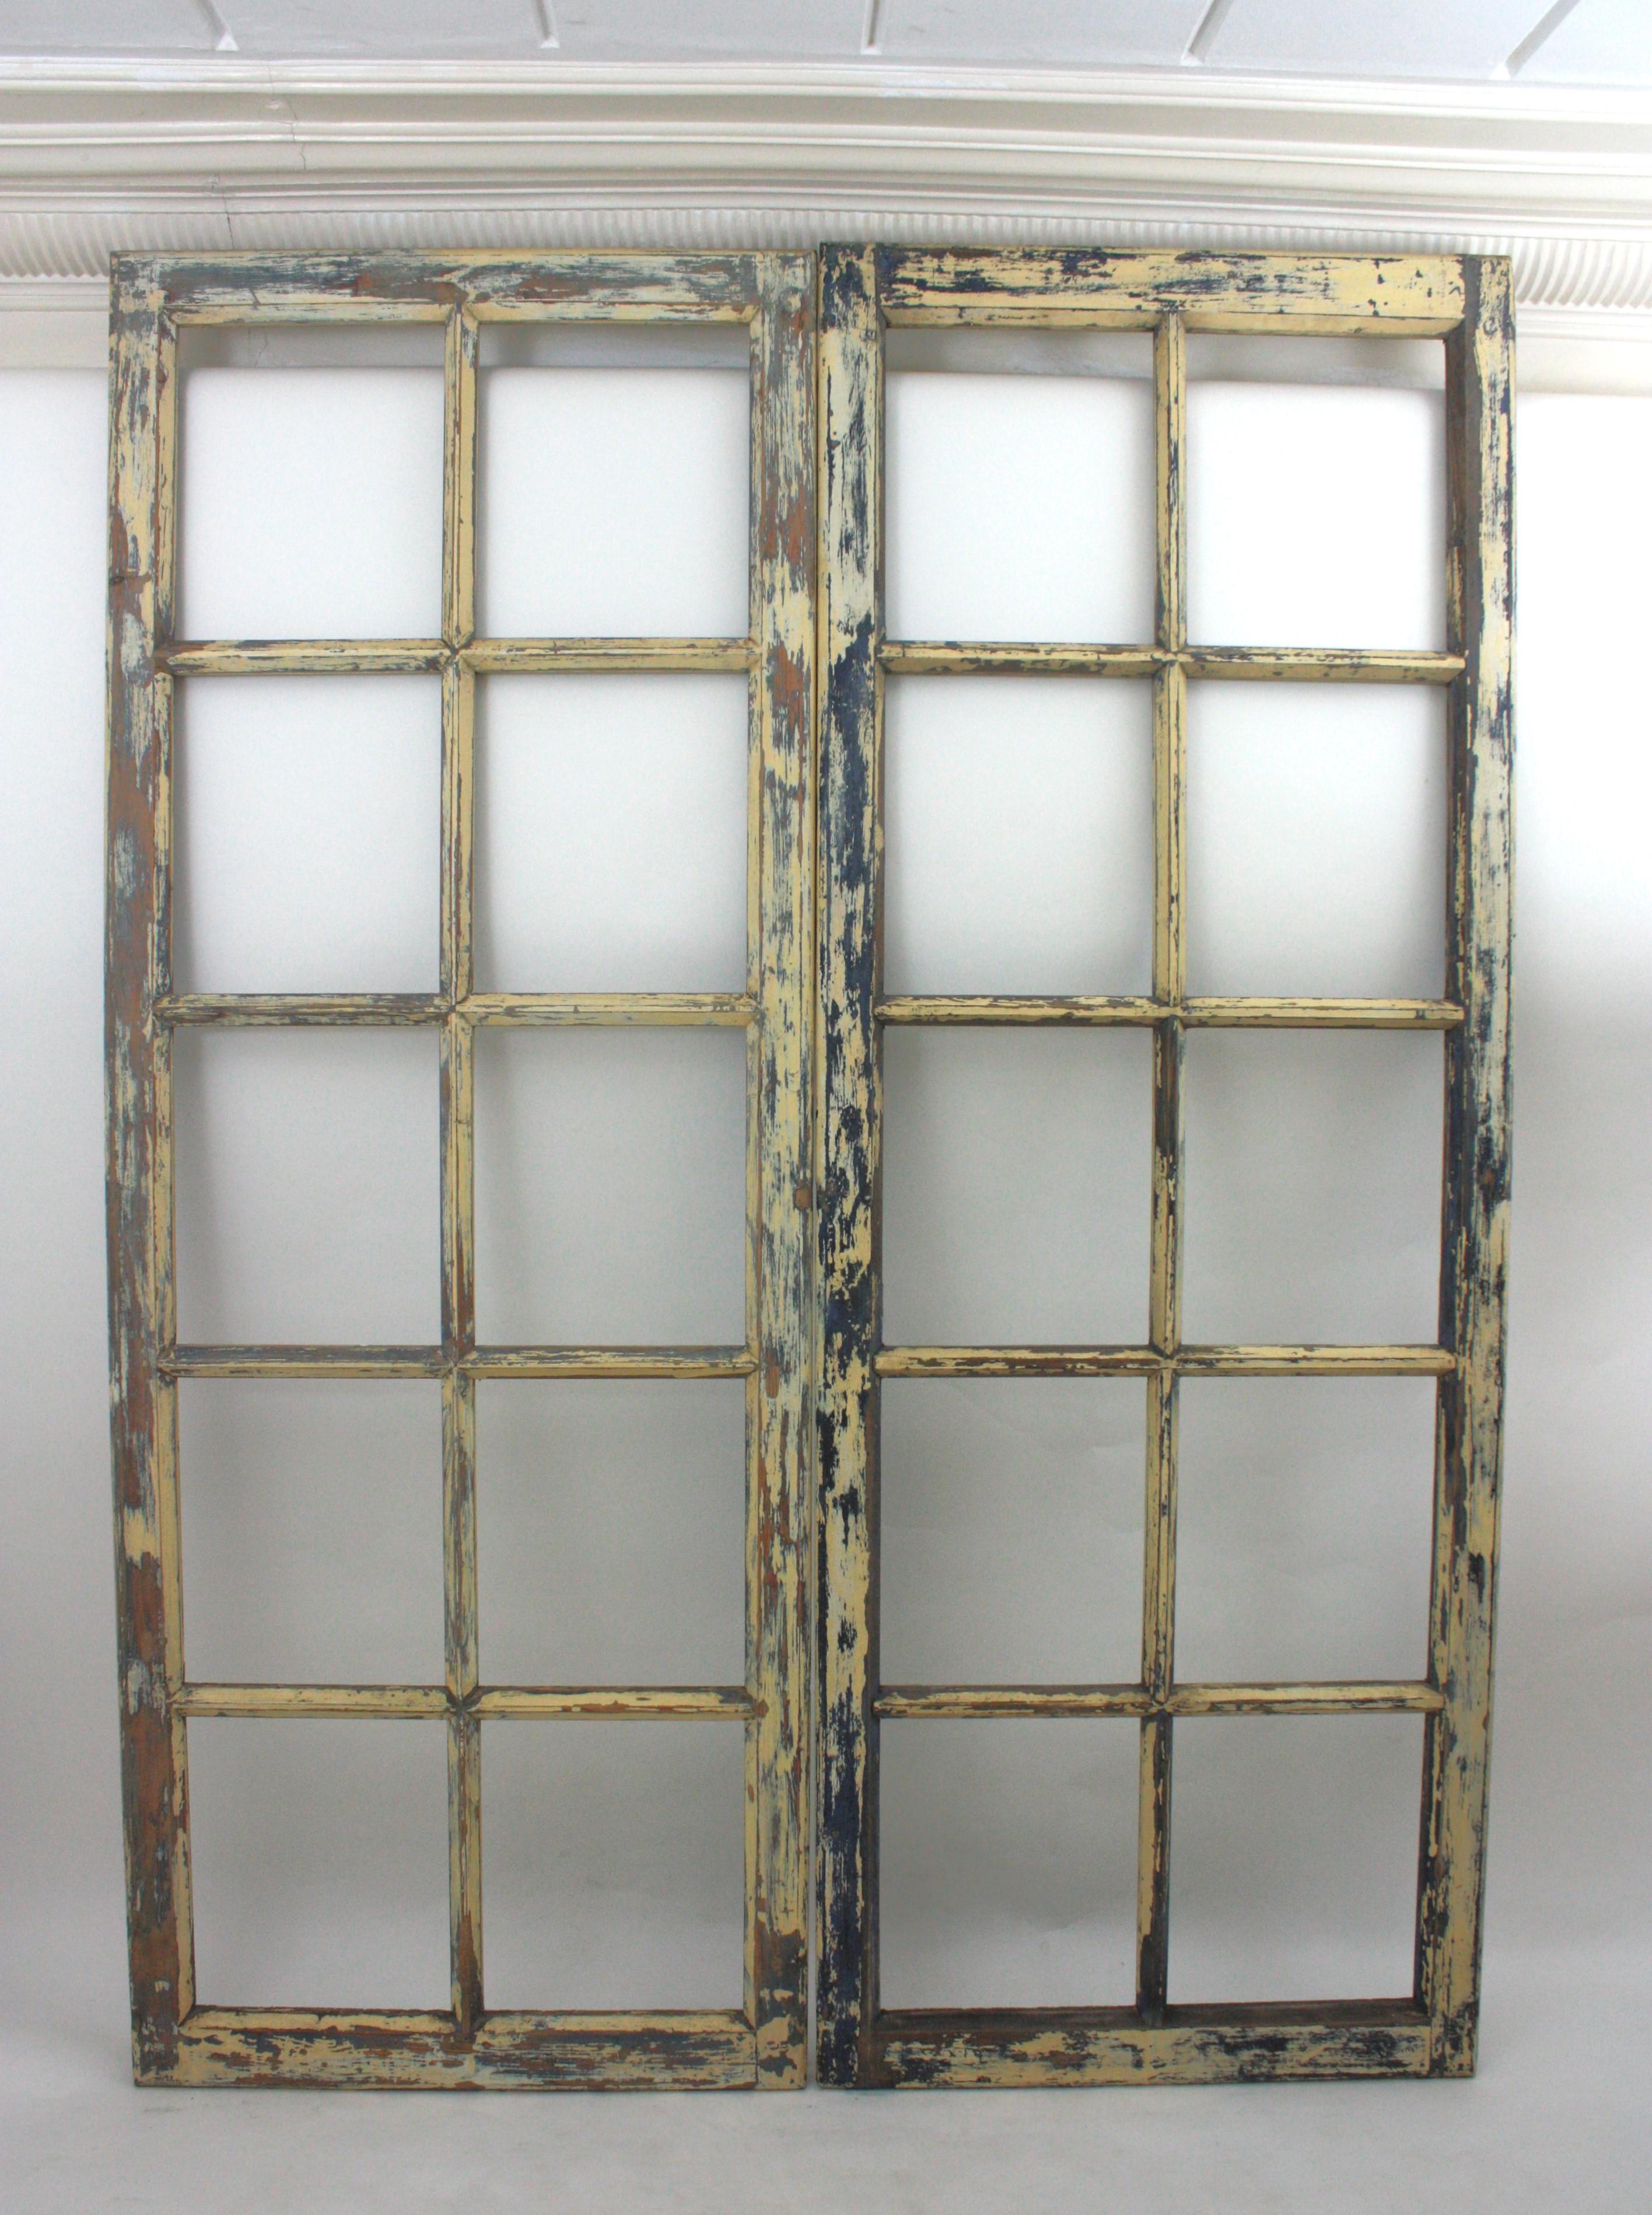 Antique Factory Paneled Wood Windows to be used as Windows or Doors, Spain, 1930s-1940s.
Pair of blue and ecru painted industrial wooden windows with panels to be used as doors, windows  or wall decoration.
These doors have an interesting original